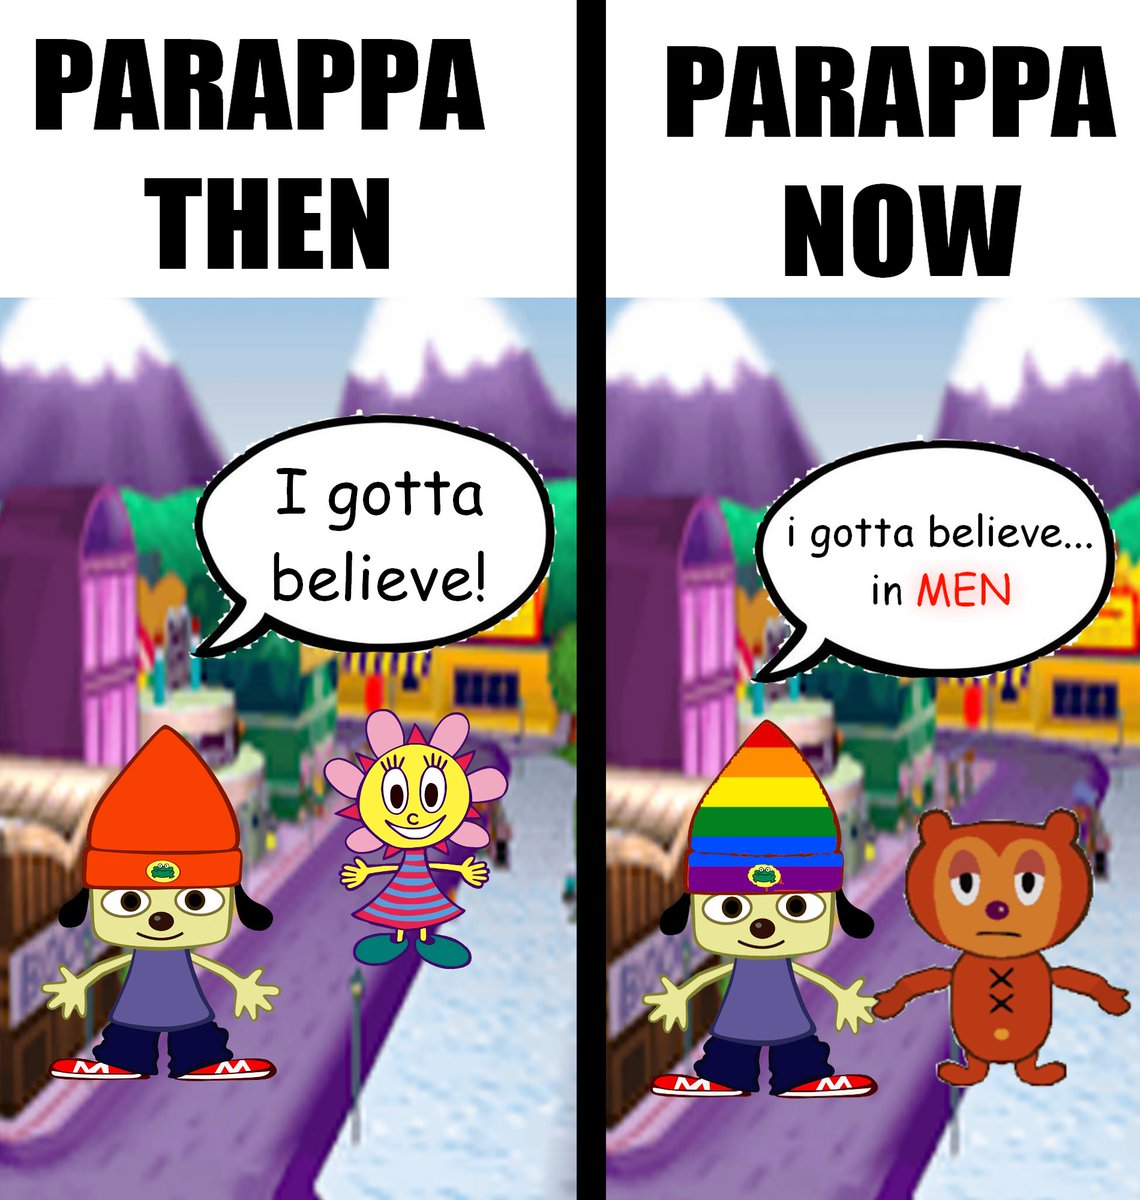 can't believe what the WOKE has done to our young Parappa..